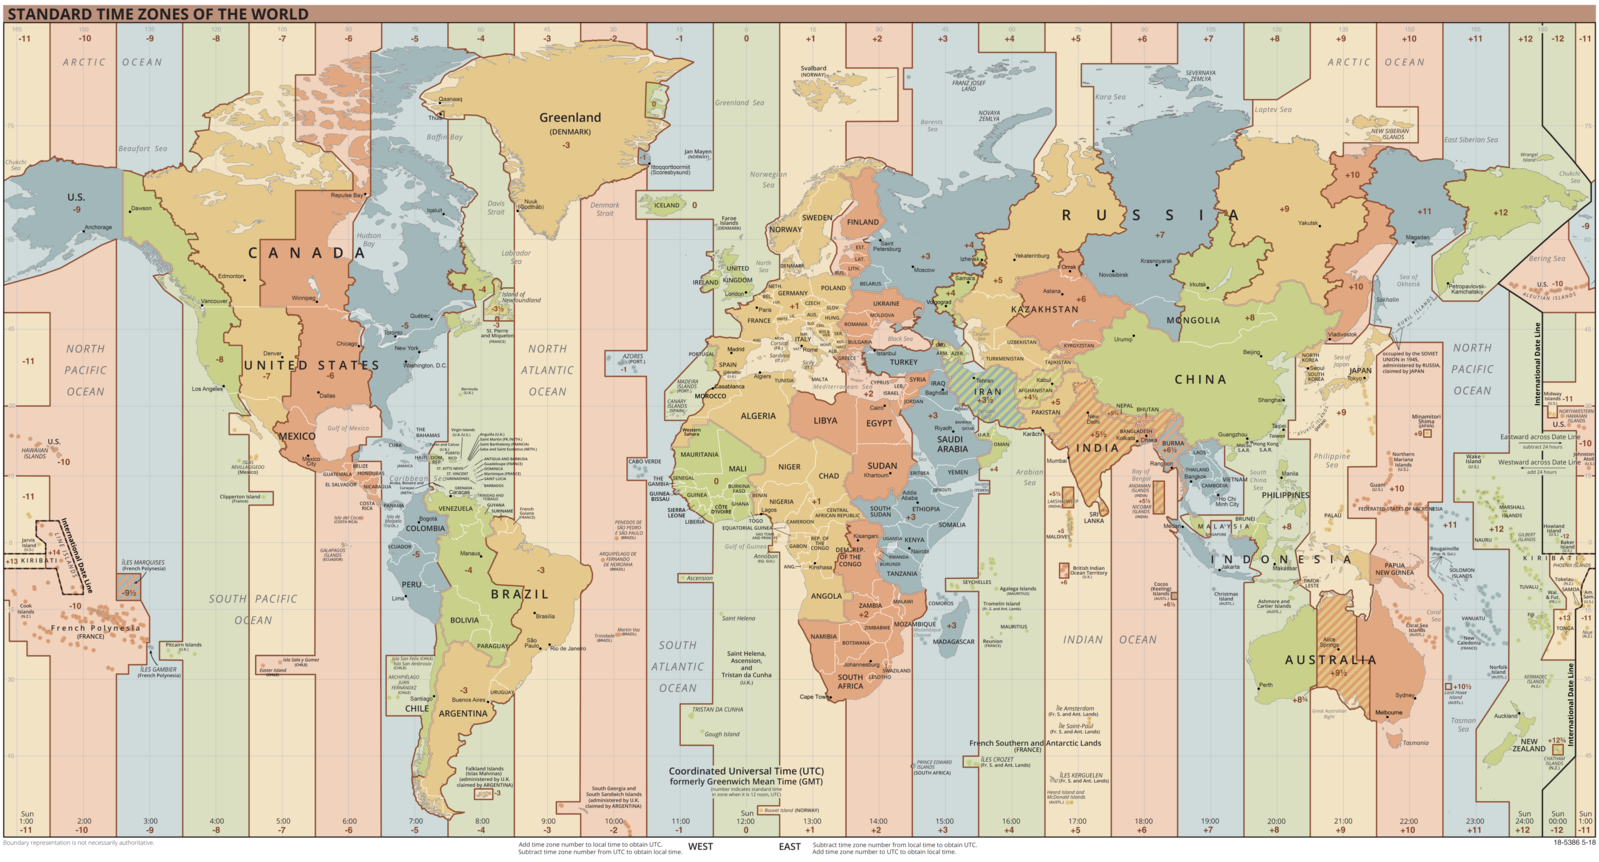 Time Zones from US Central Intelligence Agency, 2012